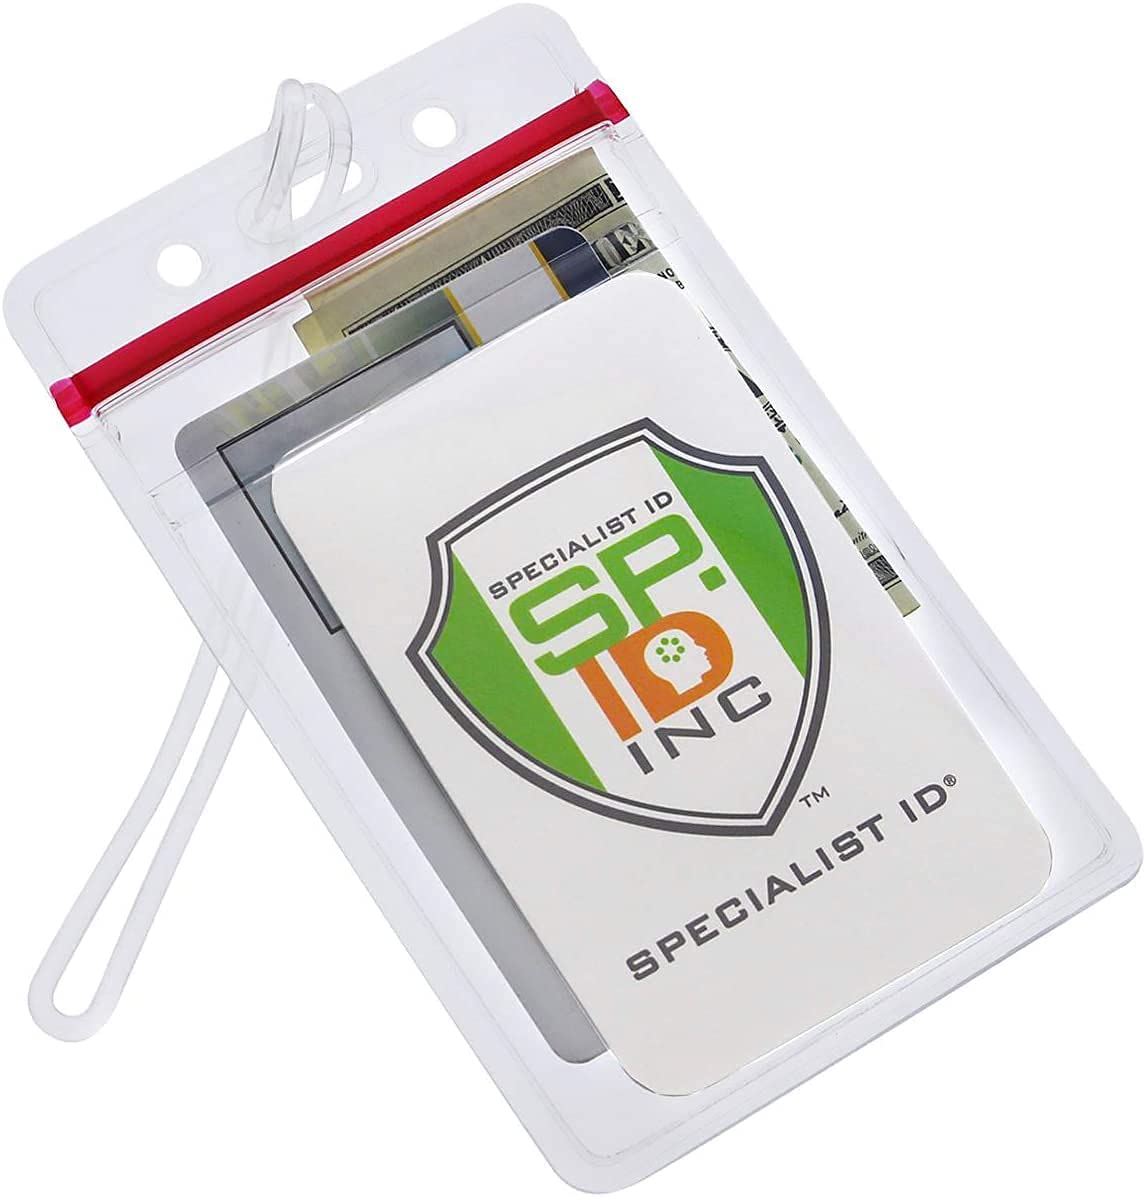 Copy of Clear Plastic Luggage Identification Tags with Loops Included - Business Card or Photo Insert (Resealable)